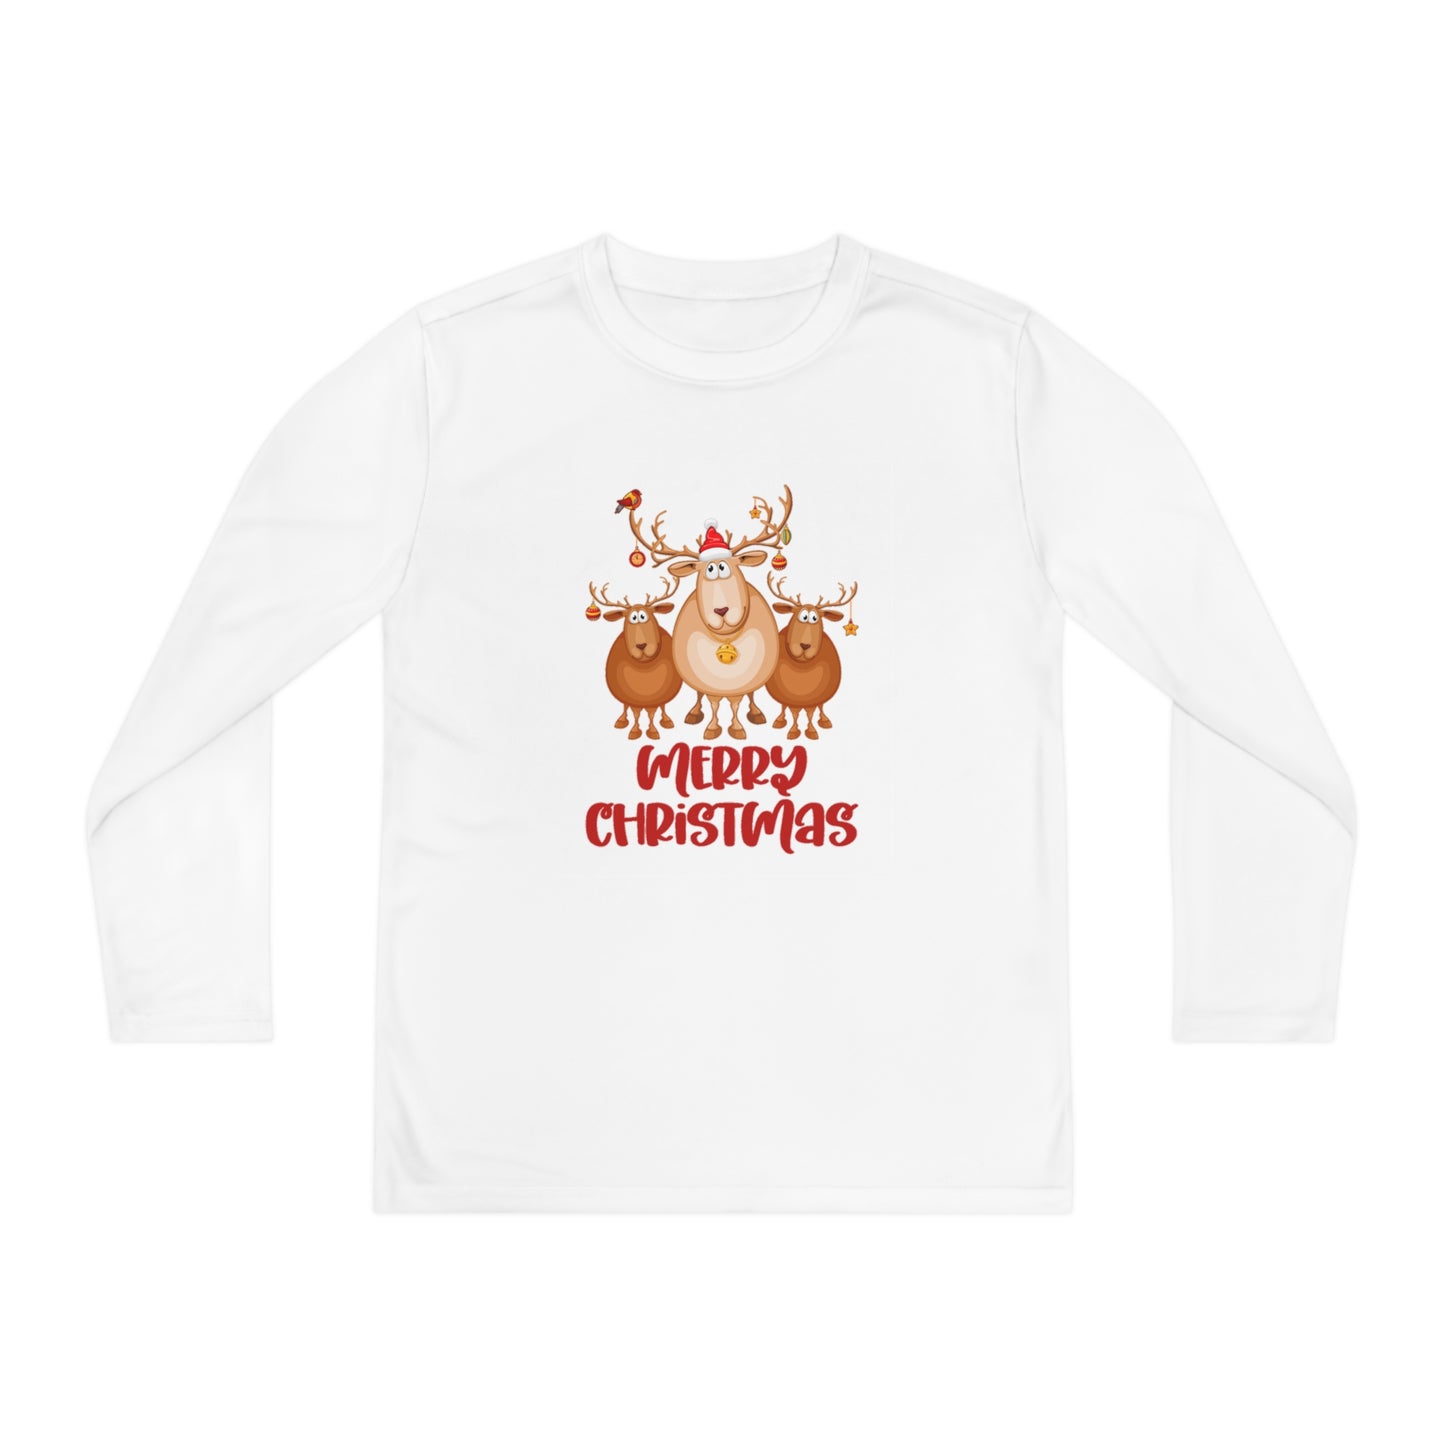 Merry Christmas Extravaganza with Our Sleek Animal Trio Youth Long Sleeve Competitor Tee Collection – A Festive Fusion of Comfort, Cheer, and Trendy Holiday Spirit!"